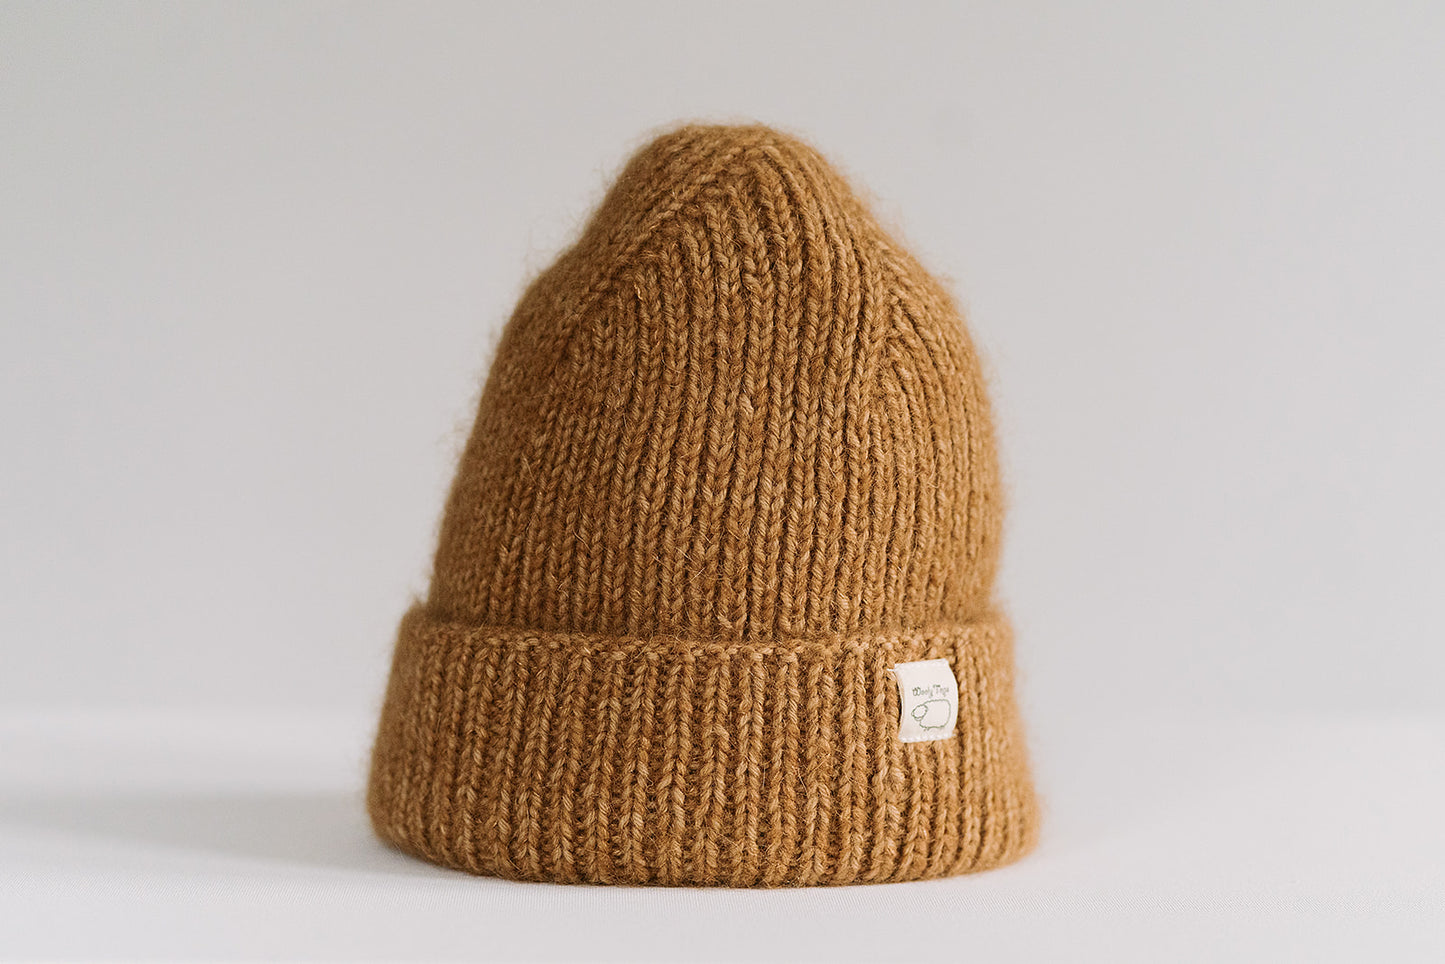 Hand-knitted Wooly Top hat in camel.